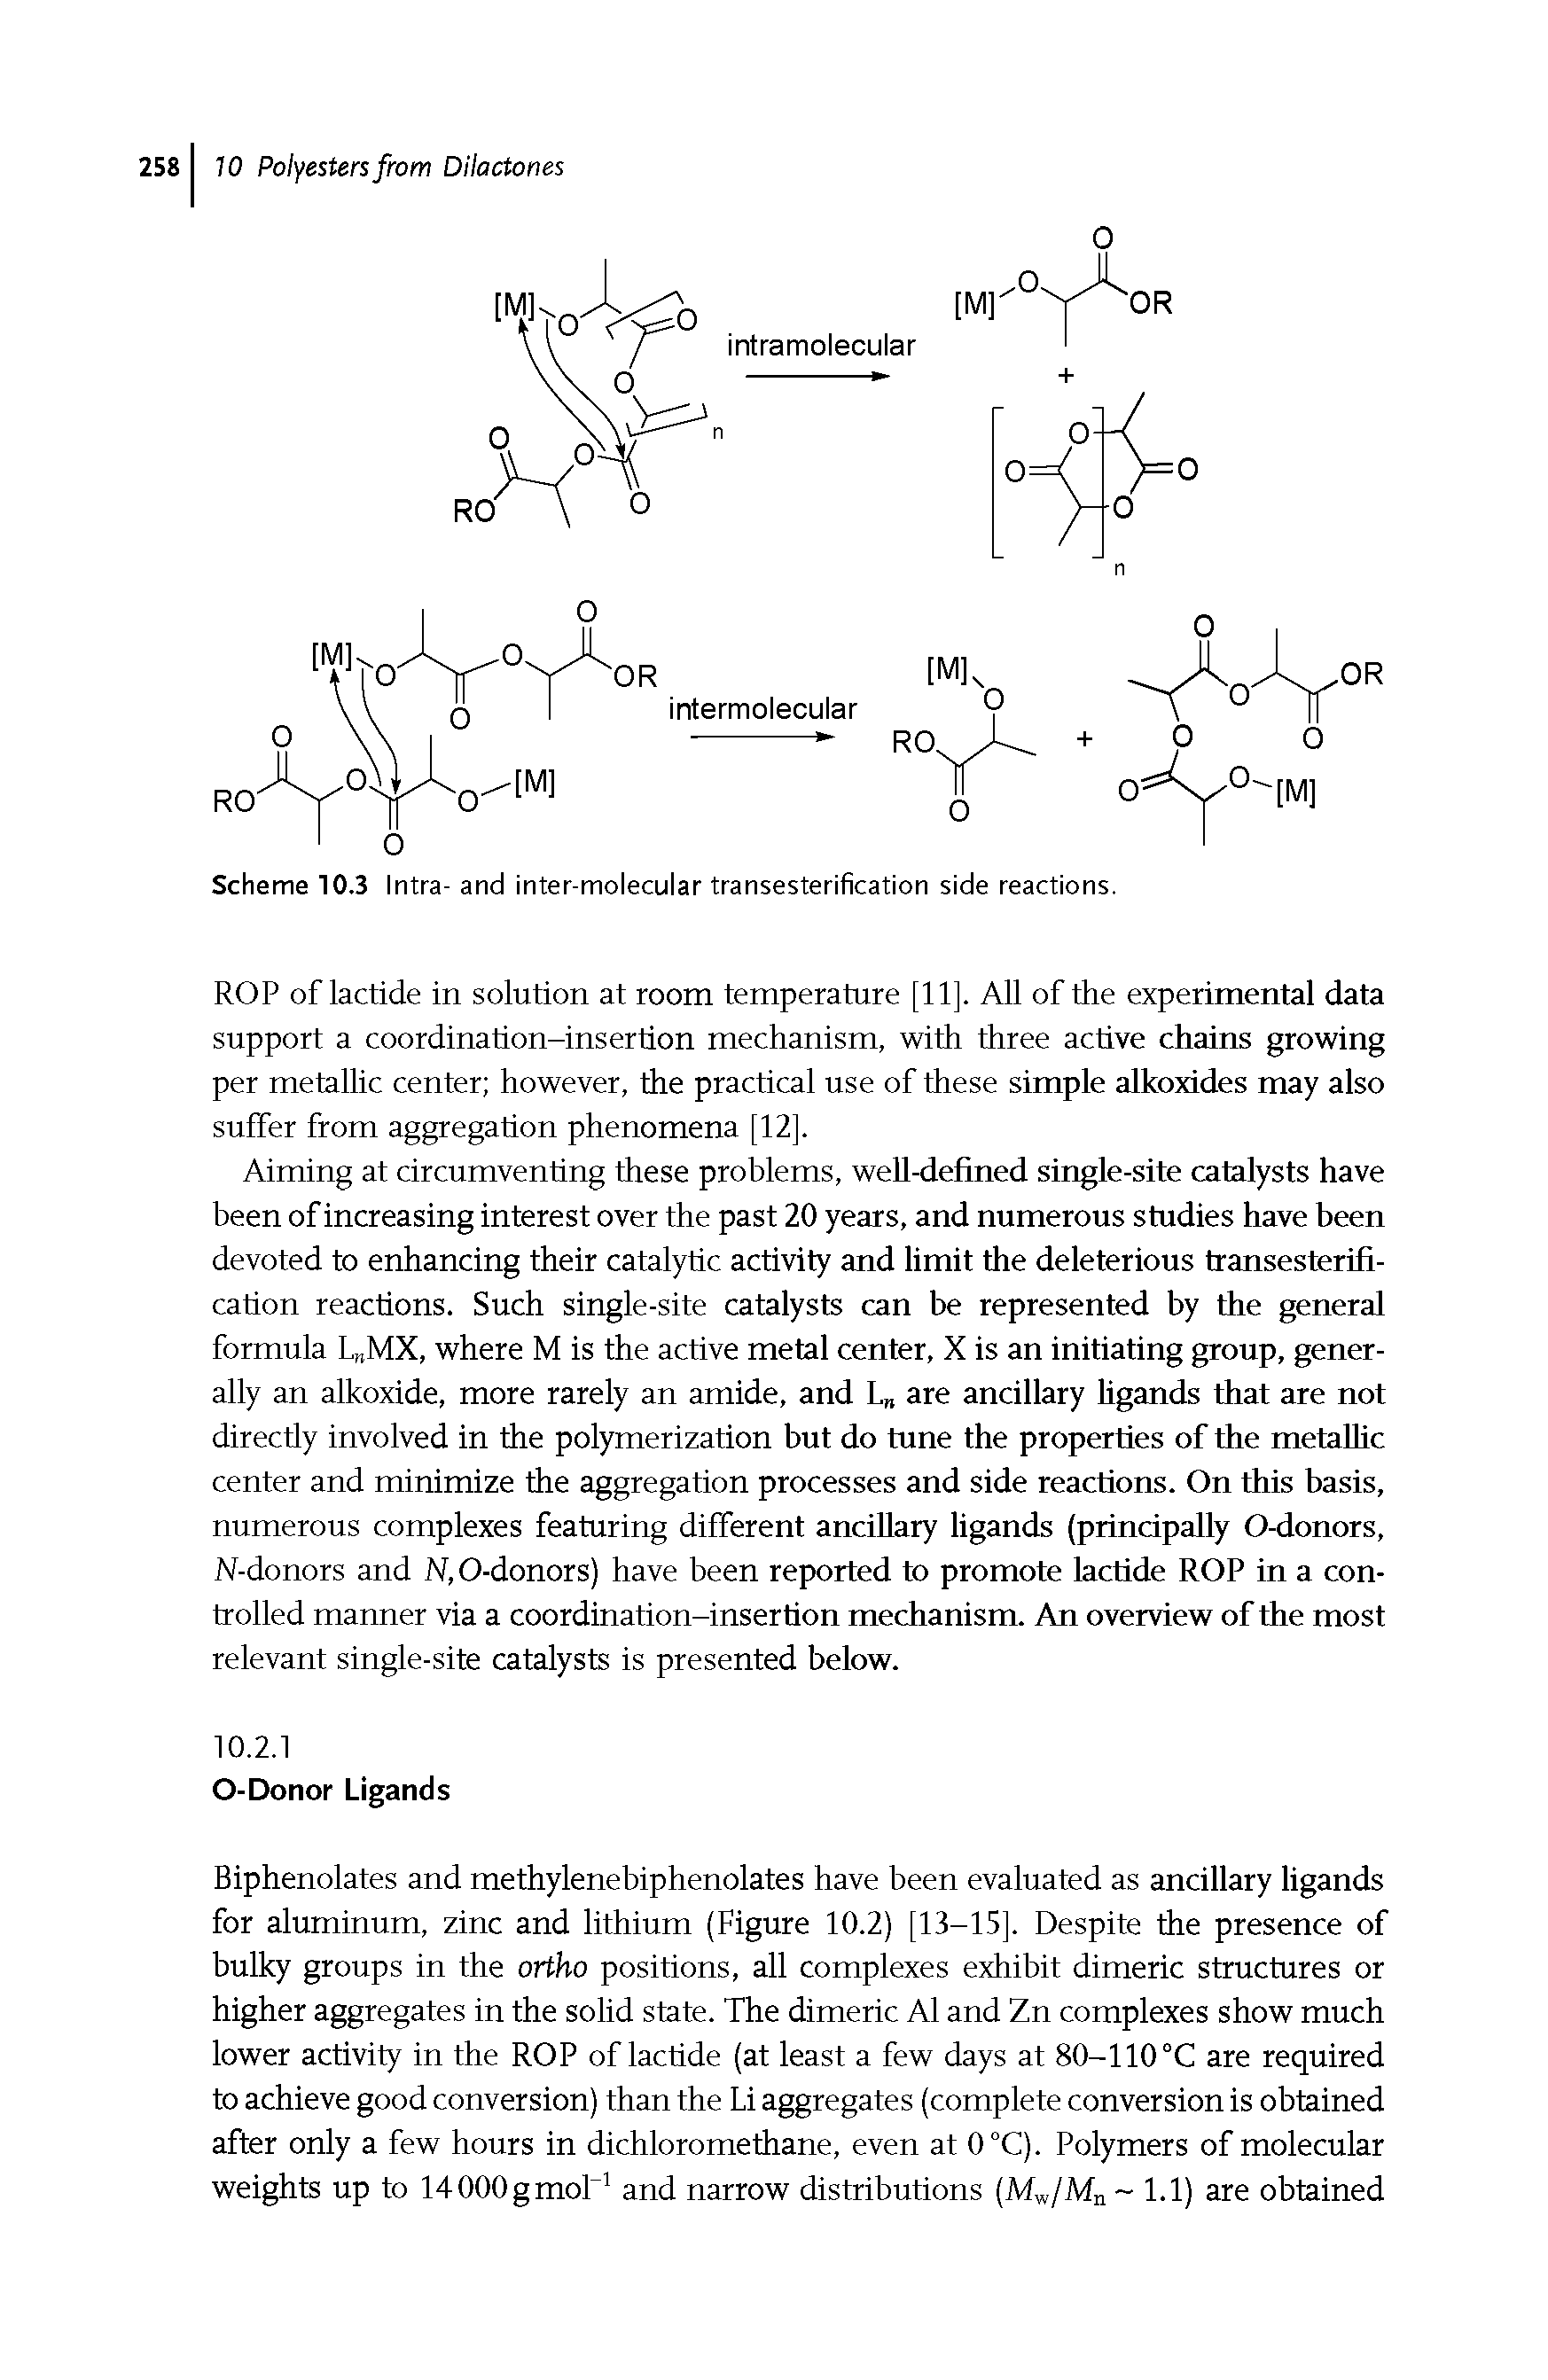 Scheme 10.3 Intra- and inter-molecular transesterification side reactions.